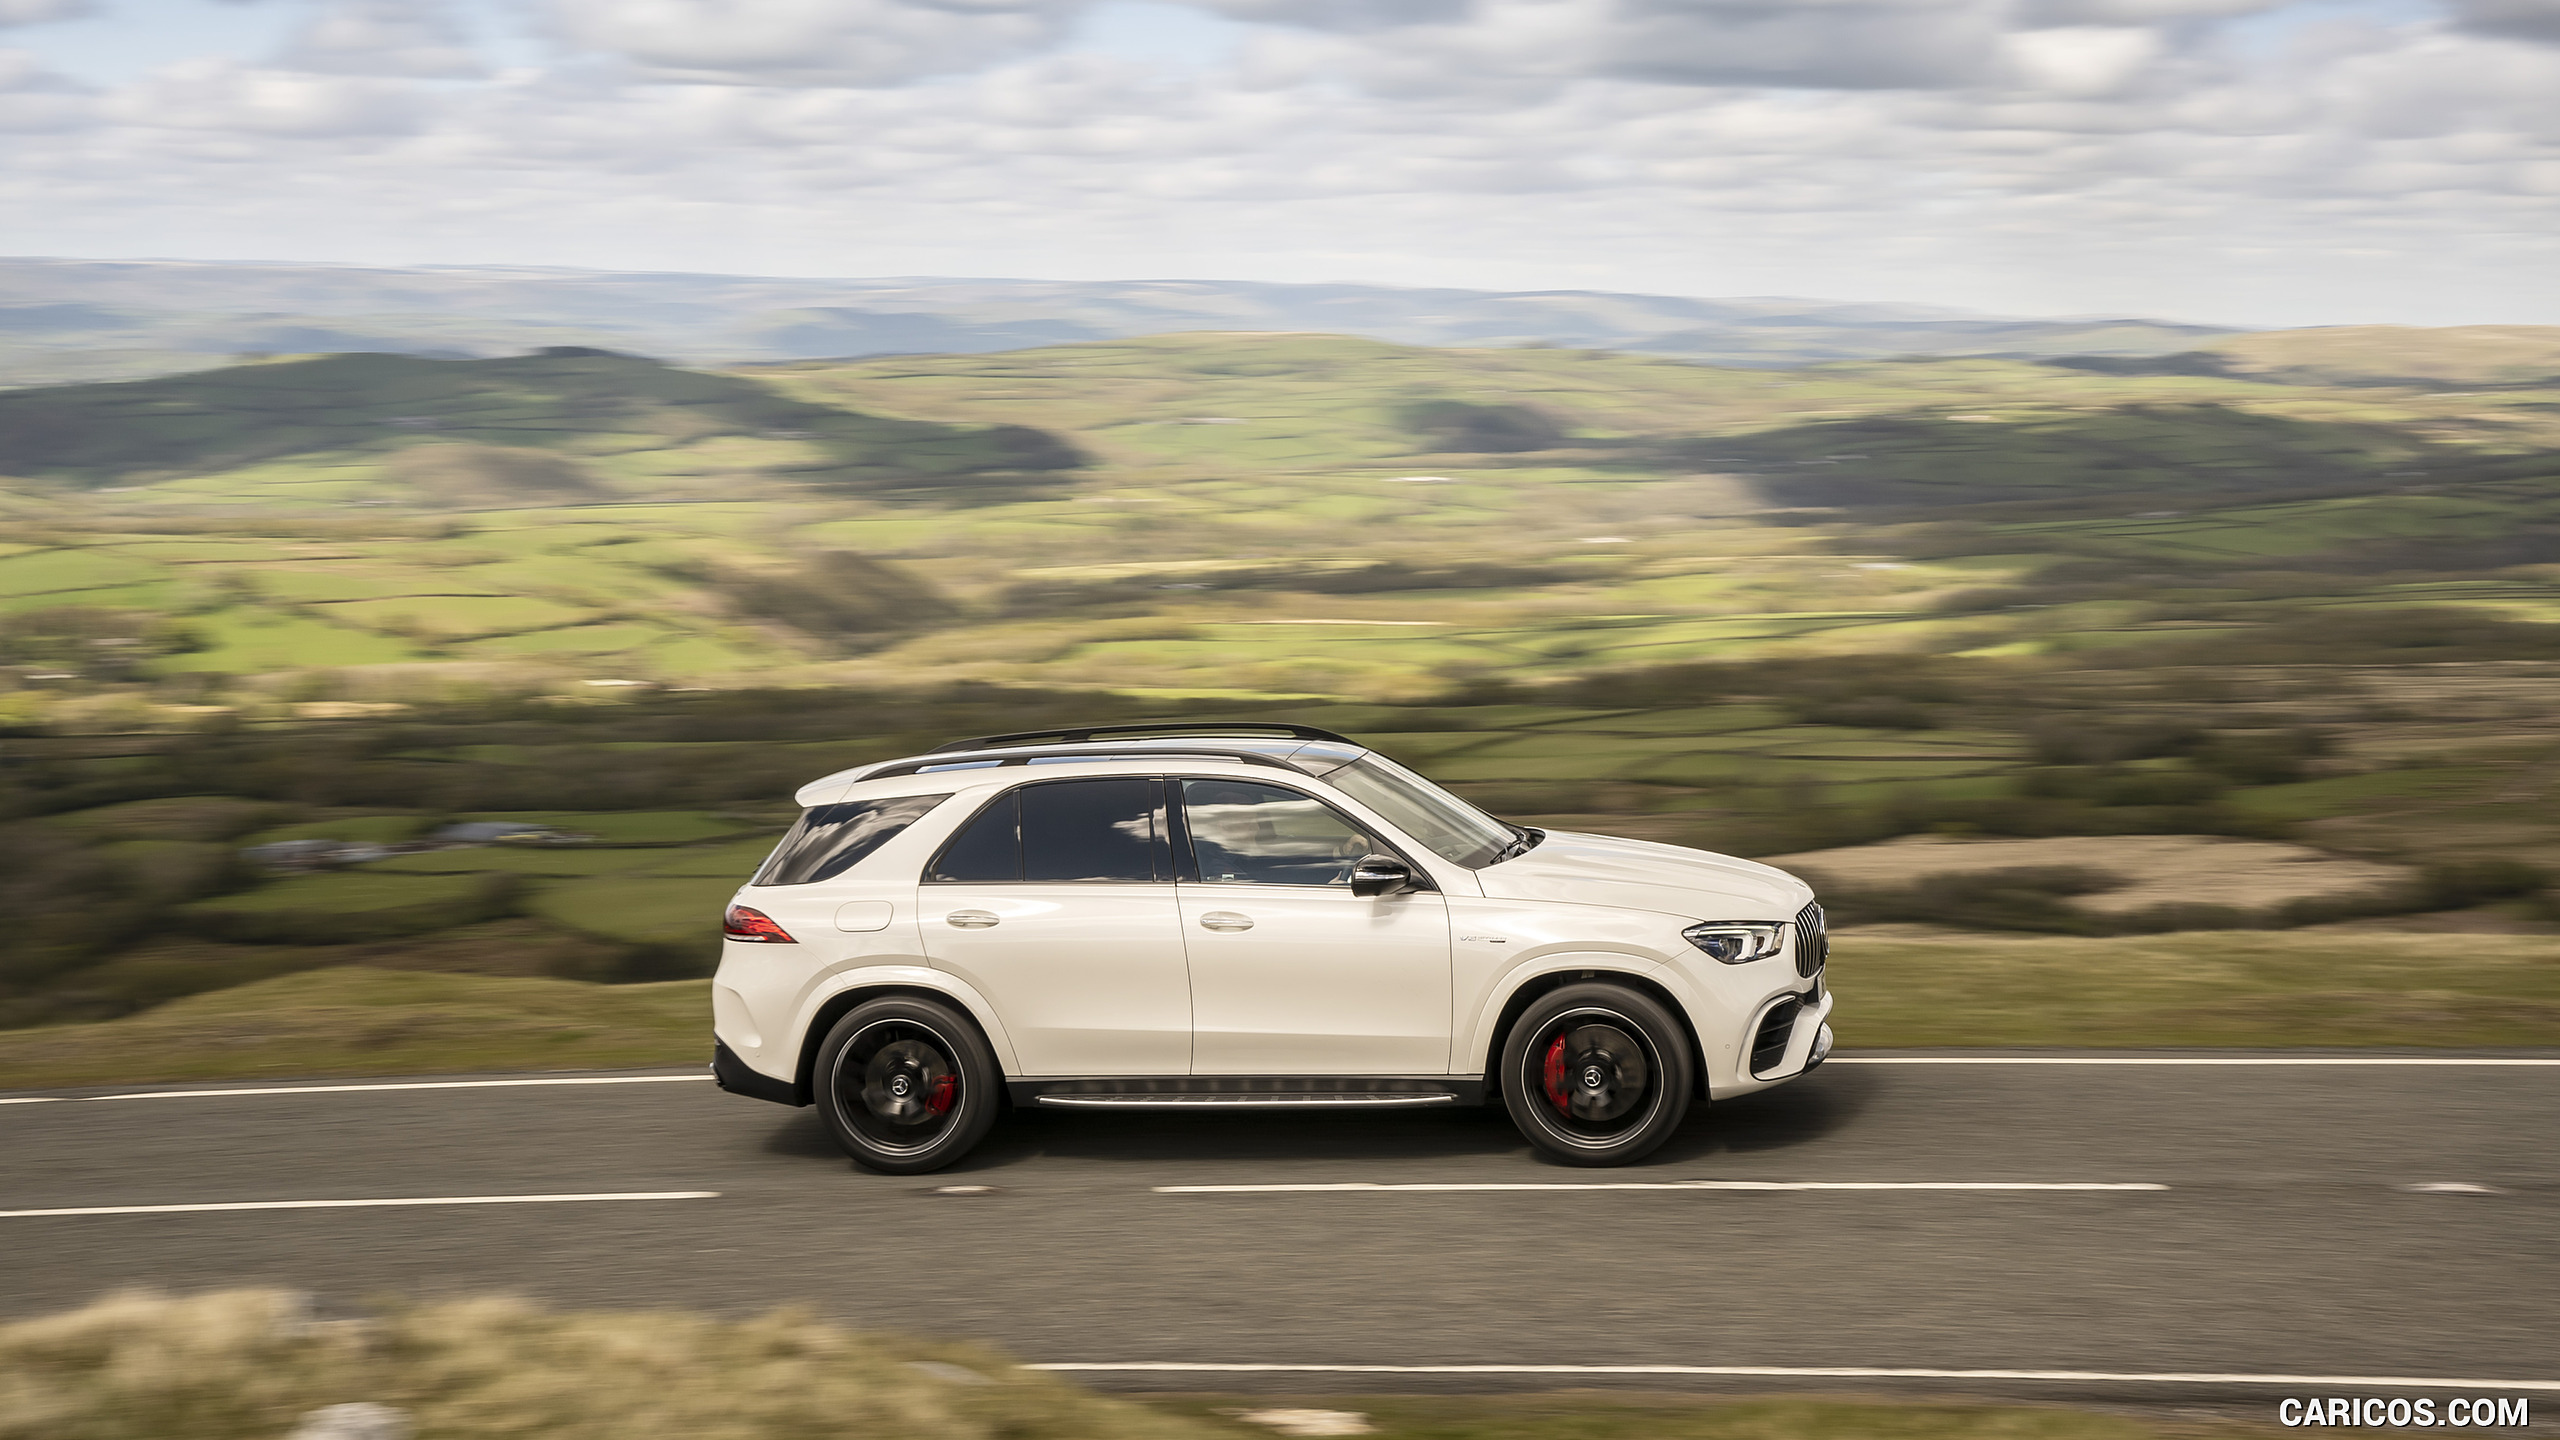 2021 Mercedes-AMG GLE 63 S 4MATIC (UK-Spec) - Side, #115 of 187